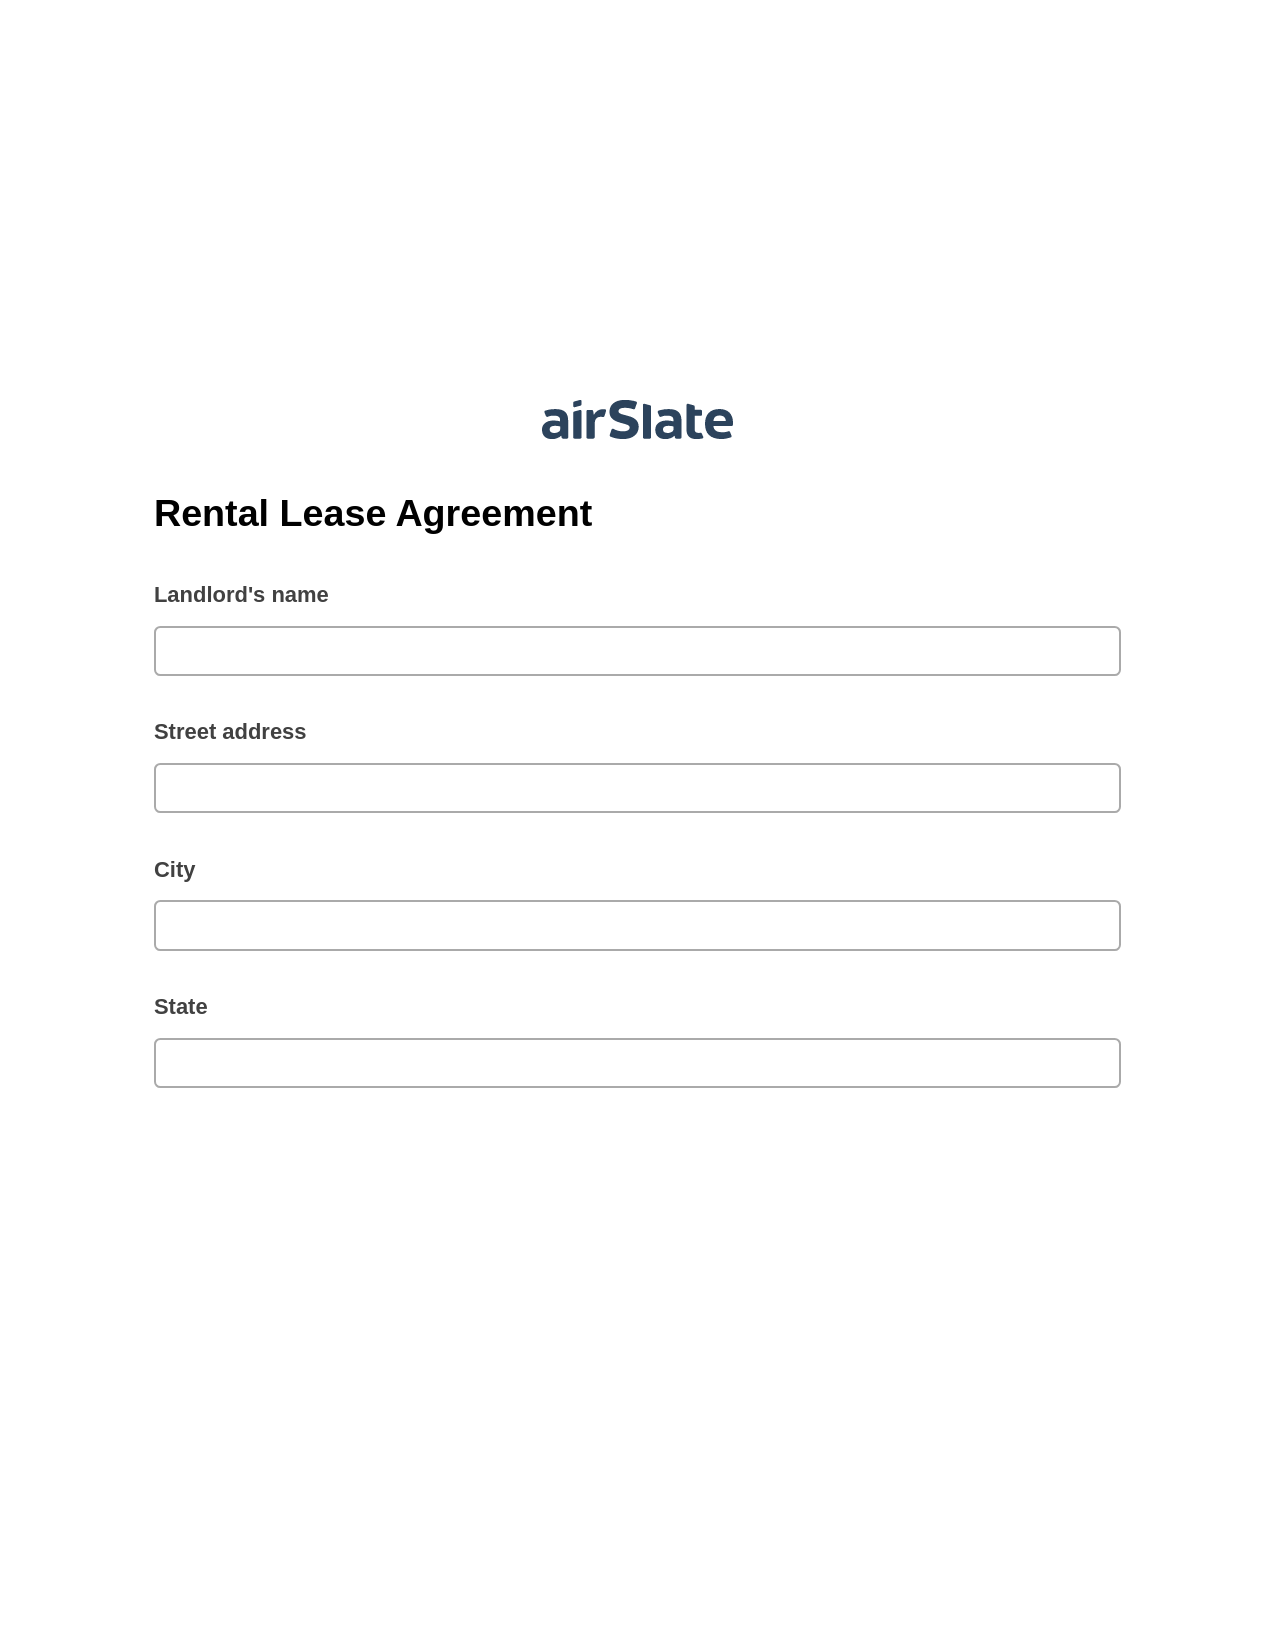 Multirole Rental Lease Agreement Pre-fill from another Slate Bot, Jira Bot, Export to Smartsheet